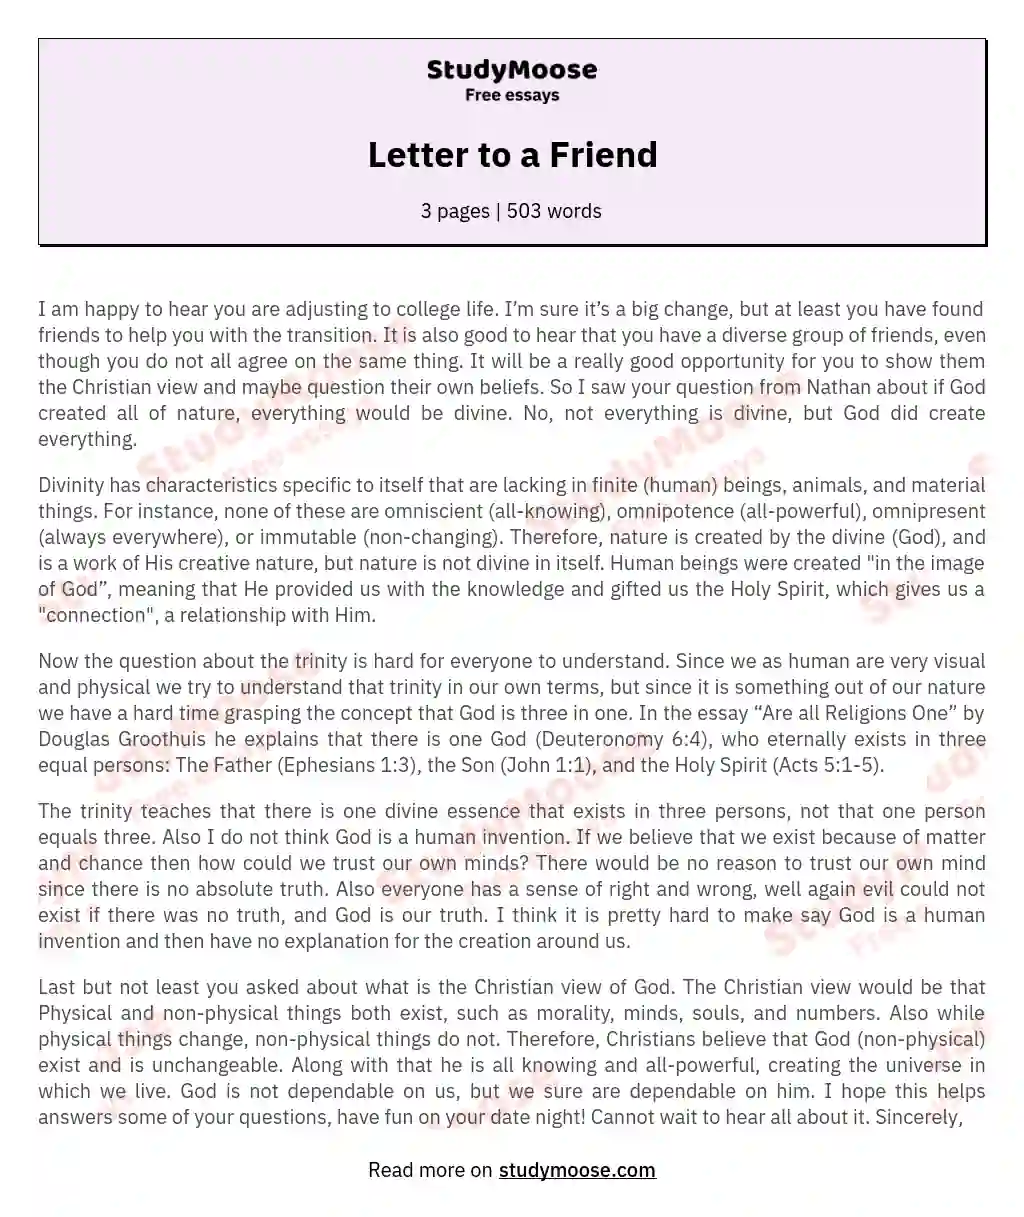 Letter to a Friend essay